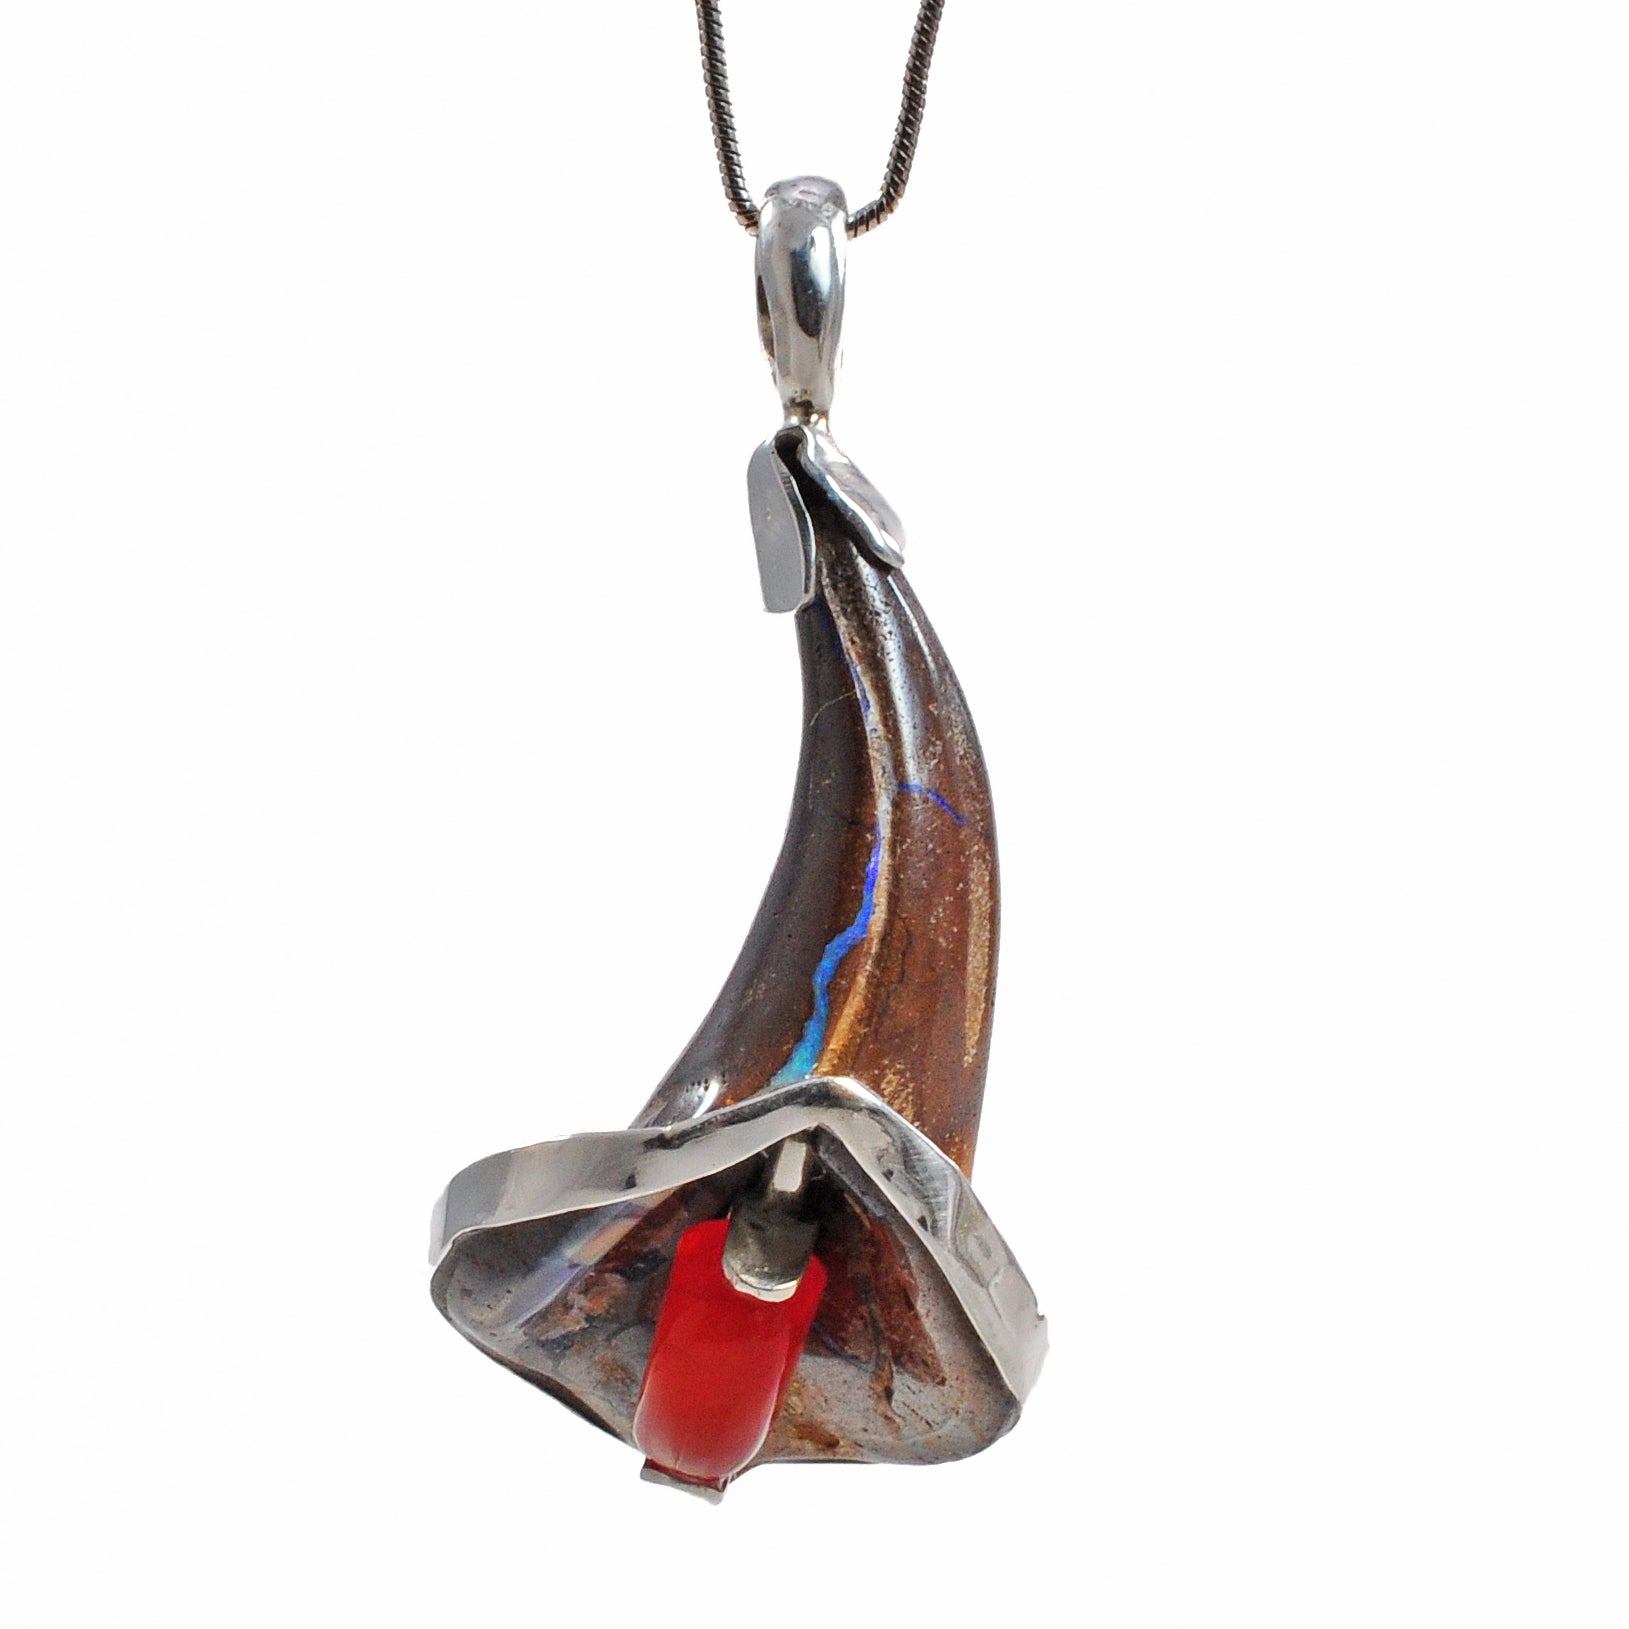 Boulder Opal 31.78 mm 21.26 ct Lily Carving Sterling Silver Handcrafted Pendant - EEO-009 - Crystalarium